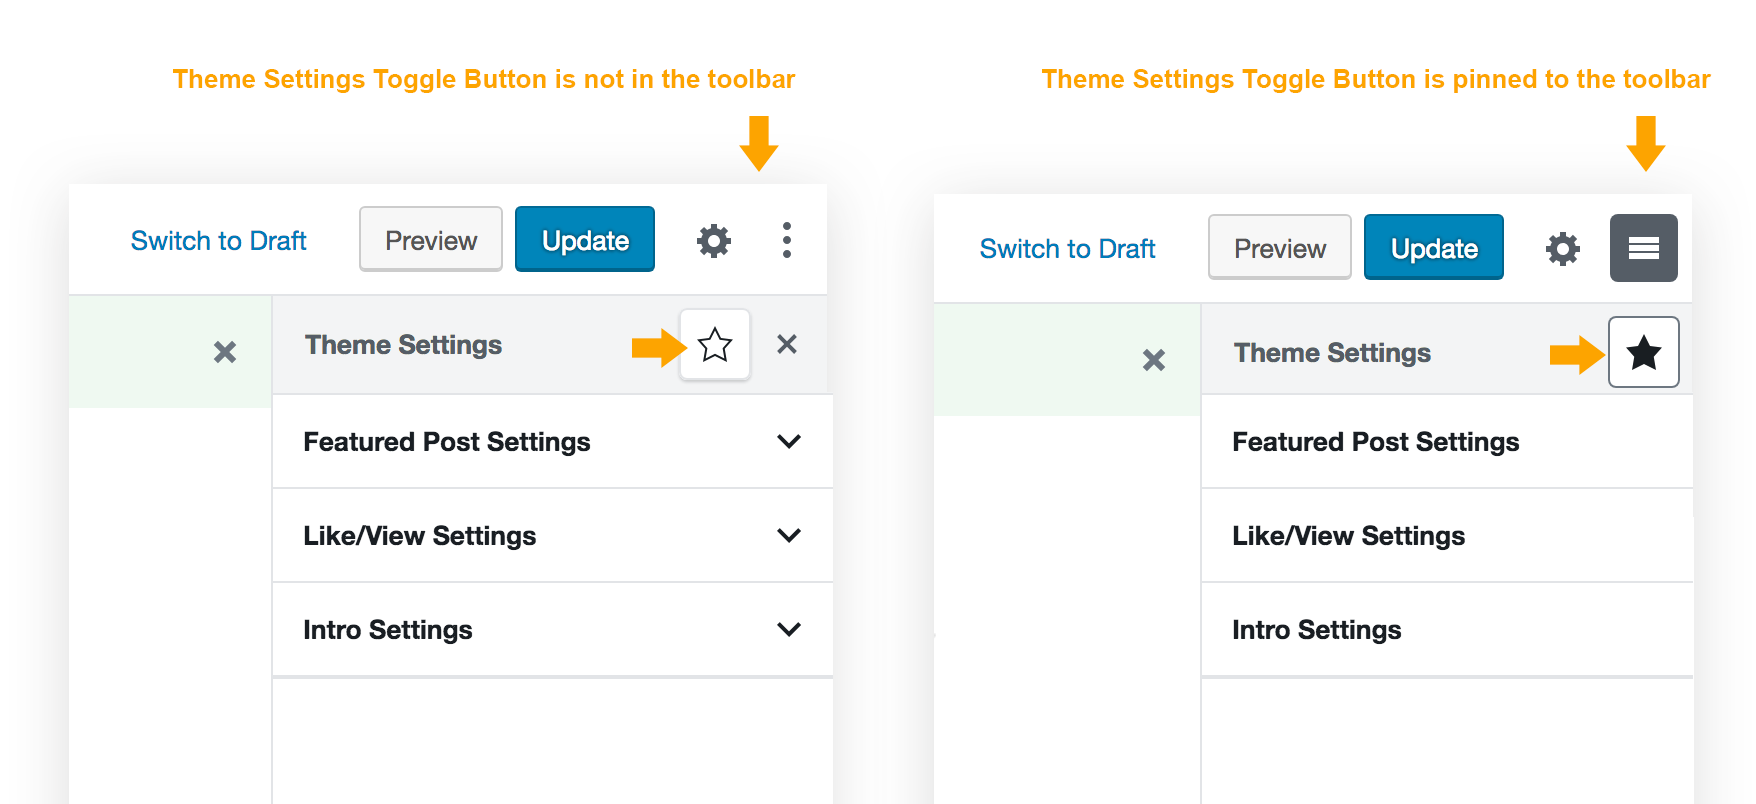 Theme Settings toggle button - Pin to Toolbar